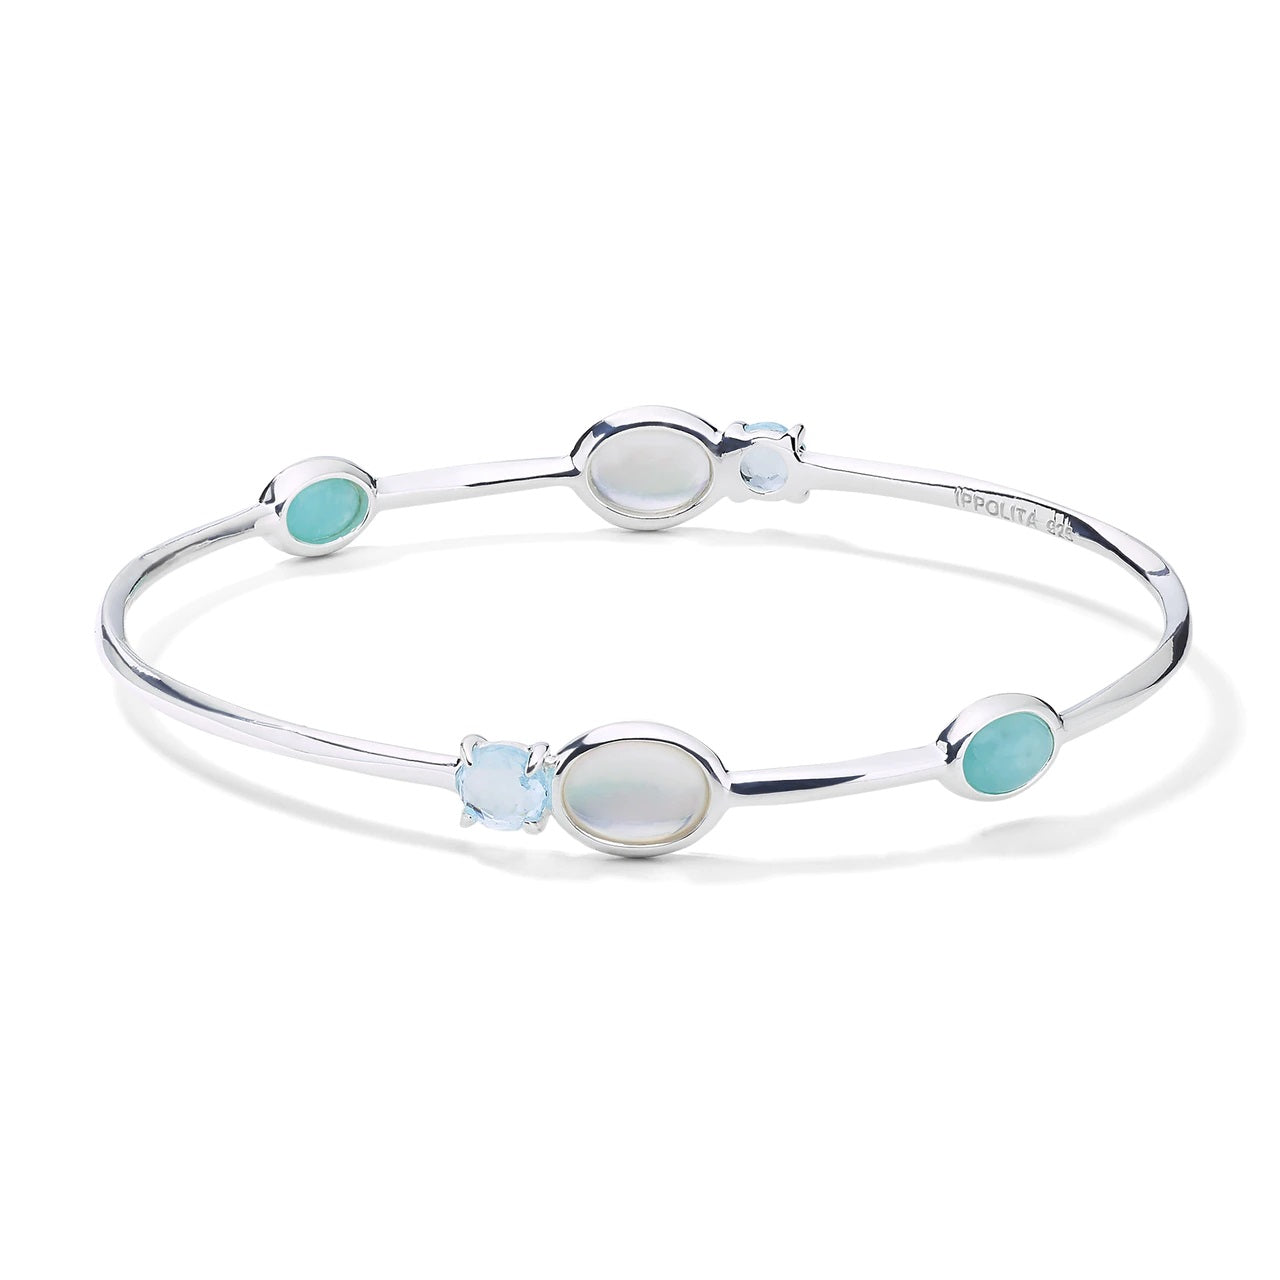 IPPOLITA Luce Sterling Silver Rock Candy Gemstone Station Bangle in Cascata